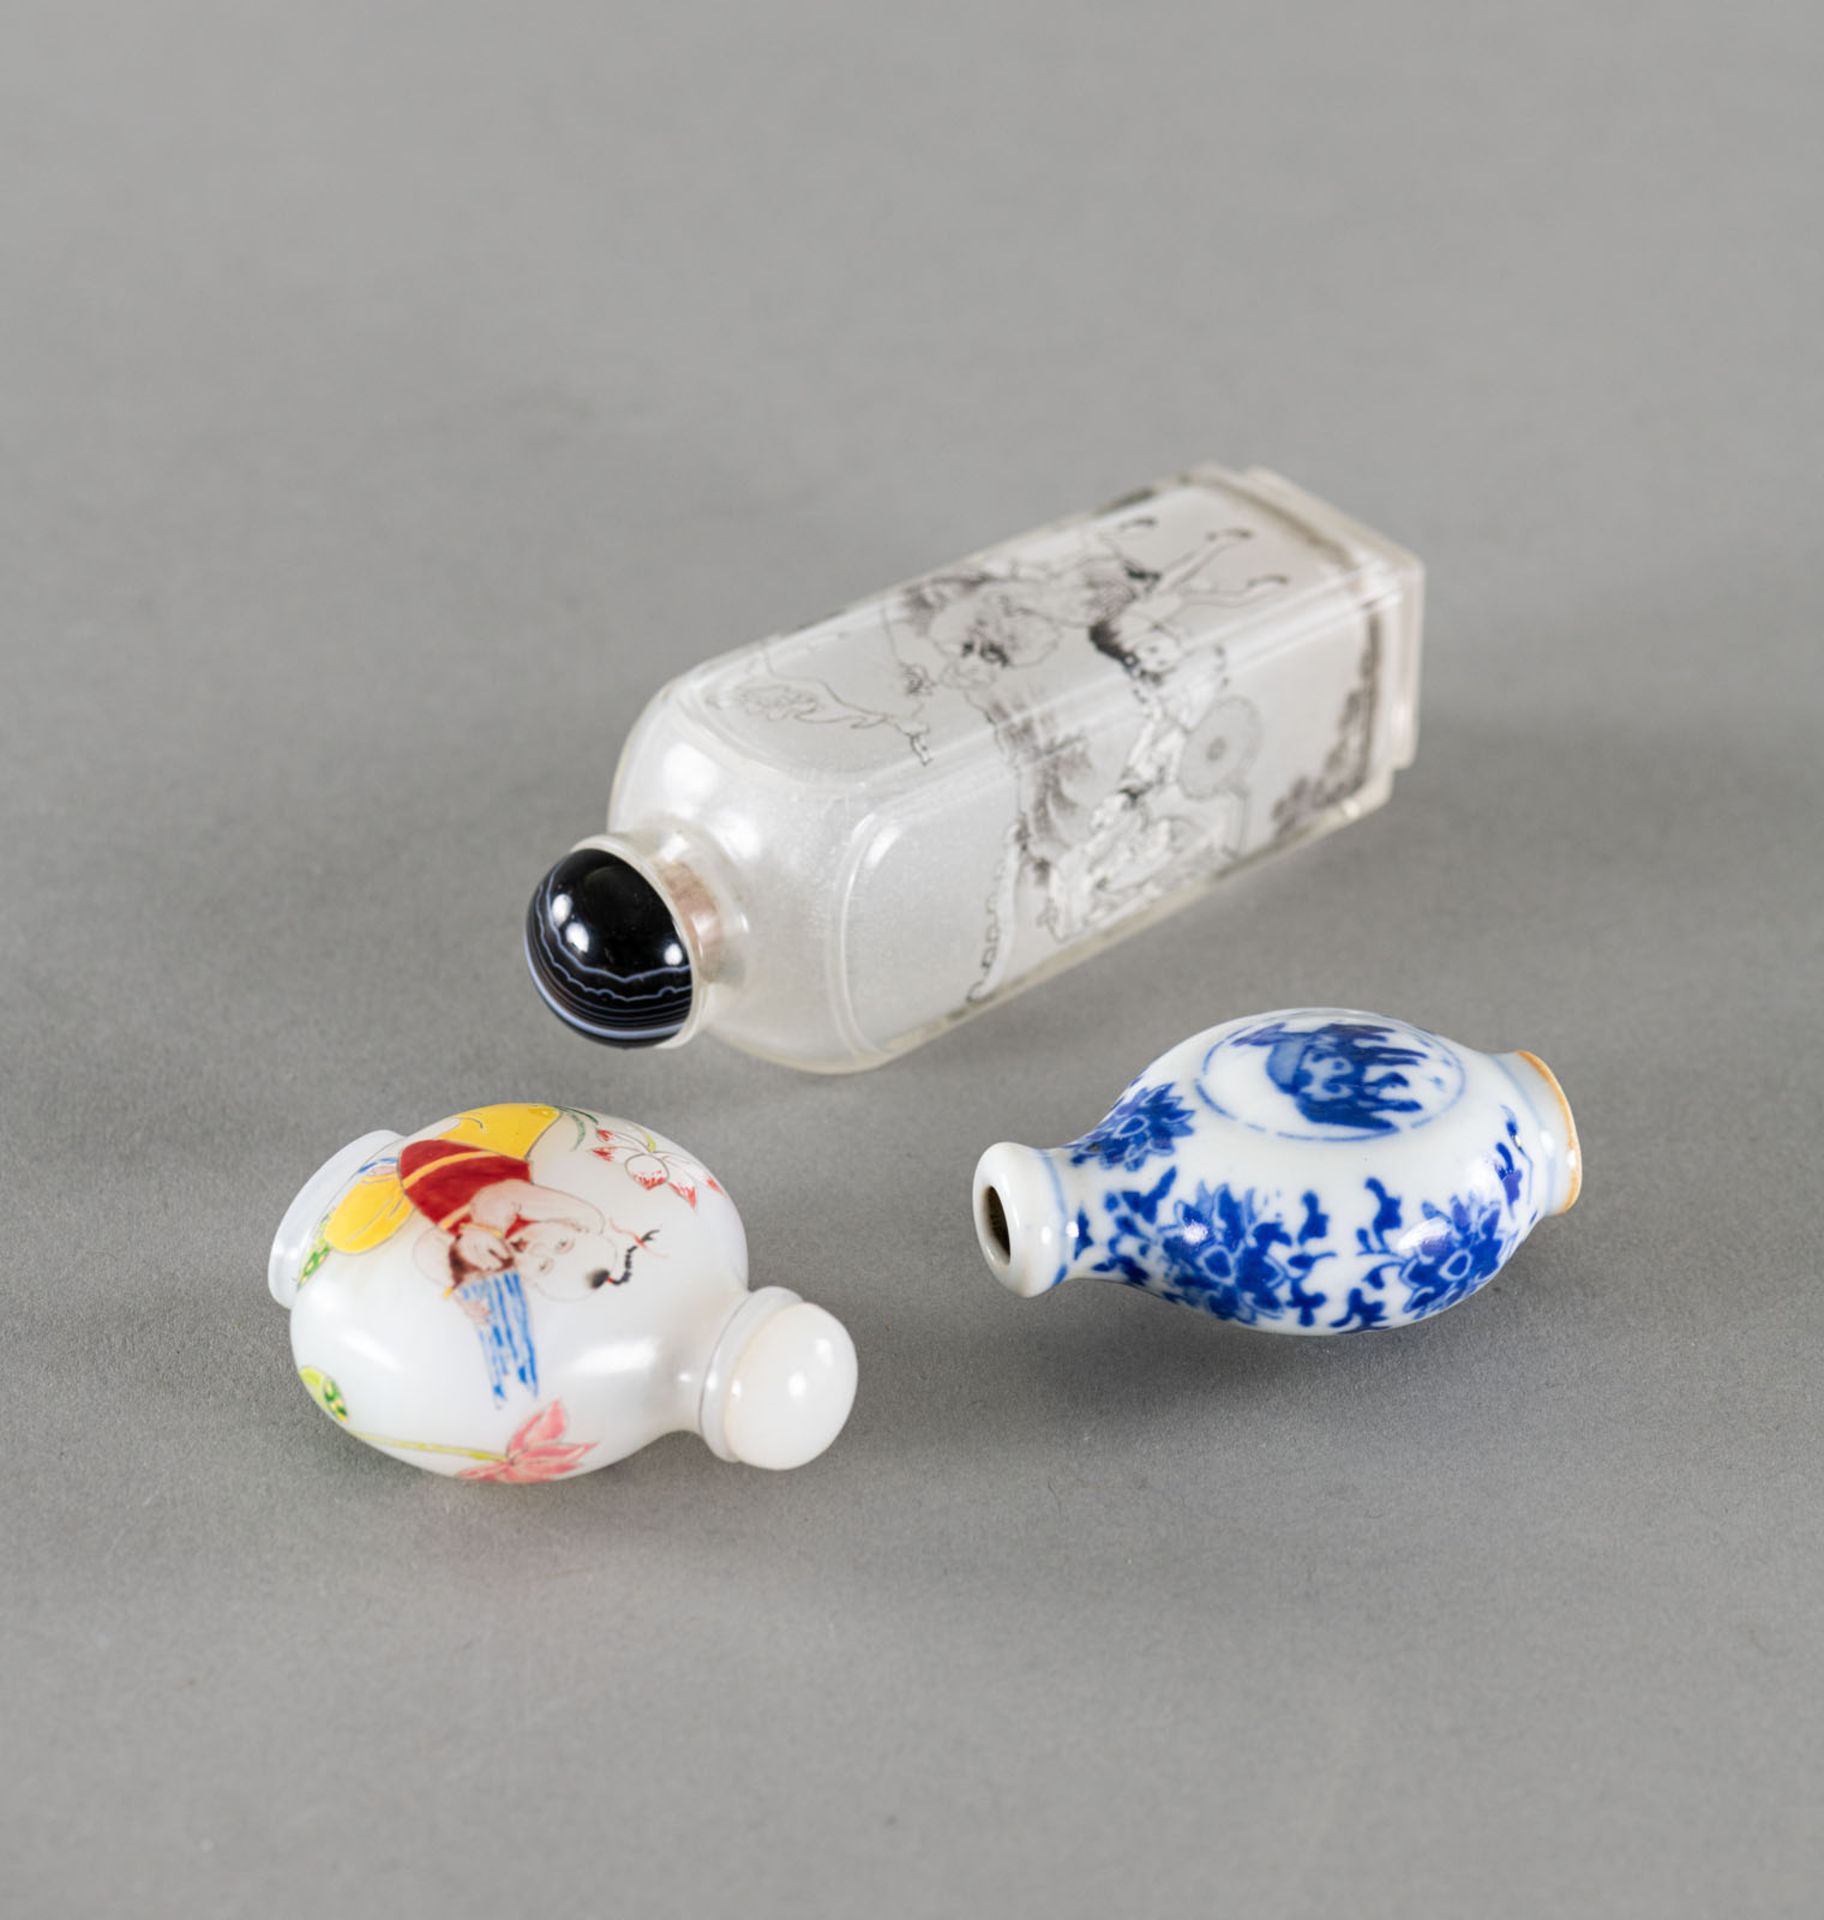 TWO GLASS AND ONE BLUE AND WHITE PORCELAIN SNUFFBOTTLE - Image 3 of 5